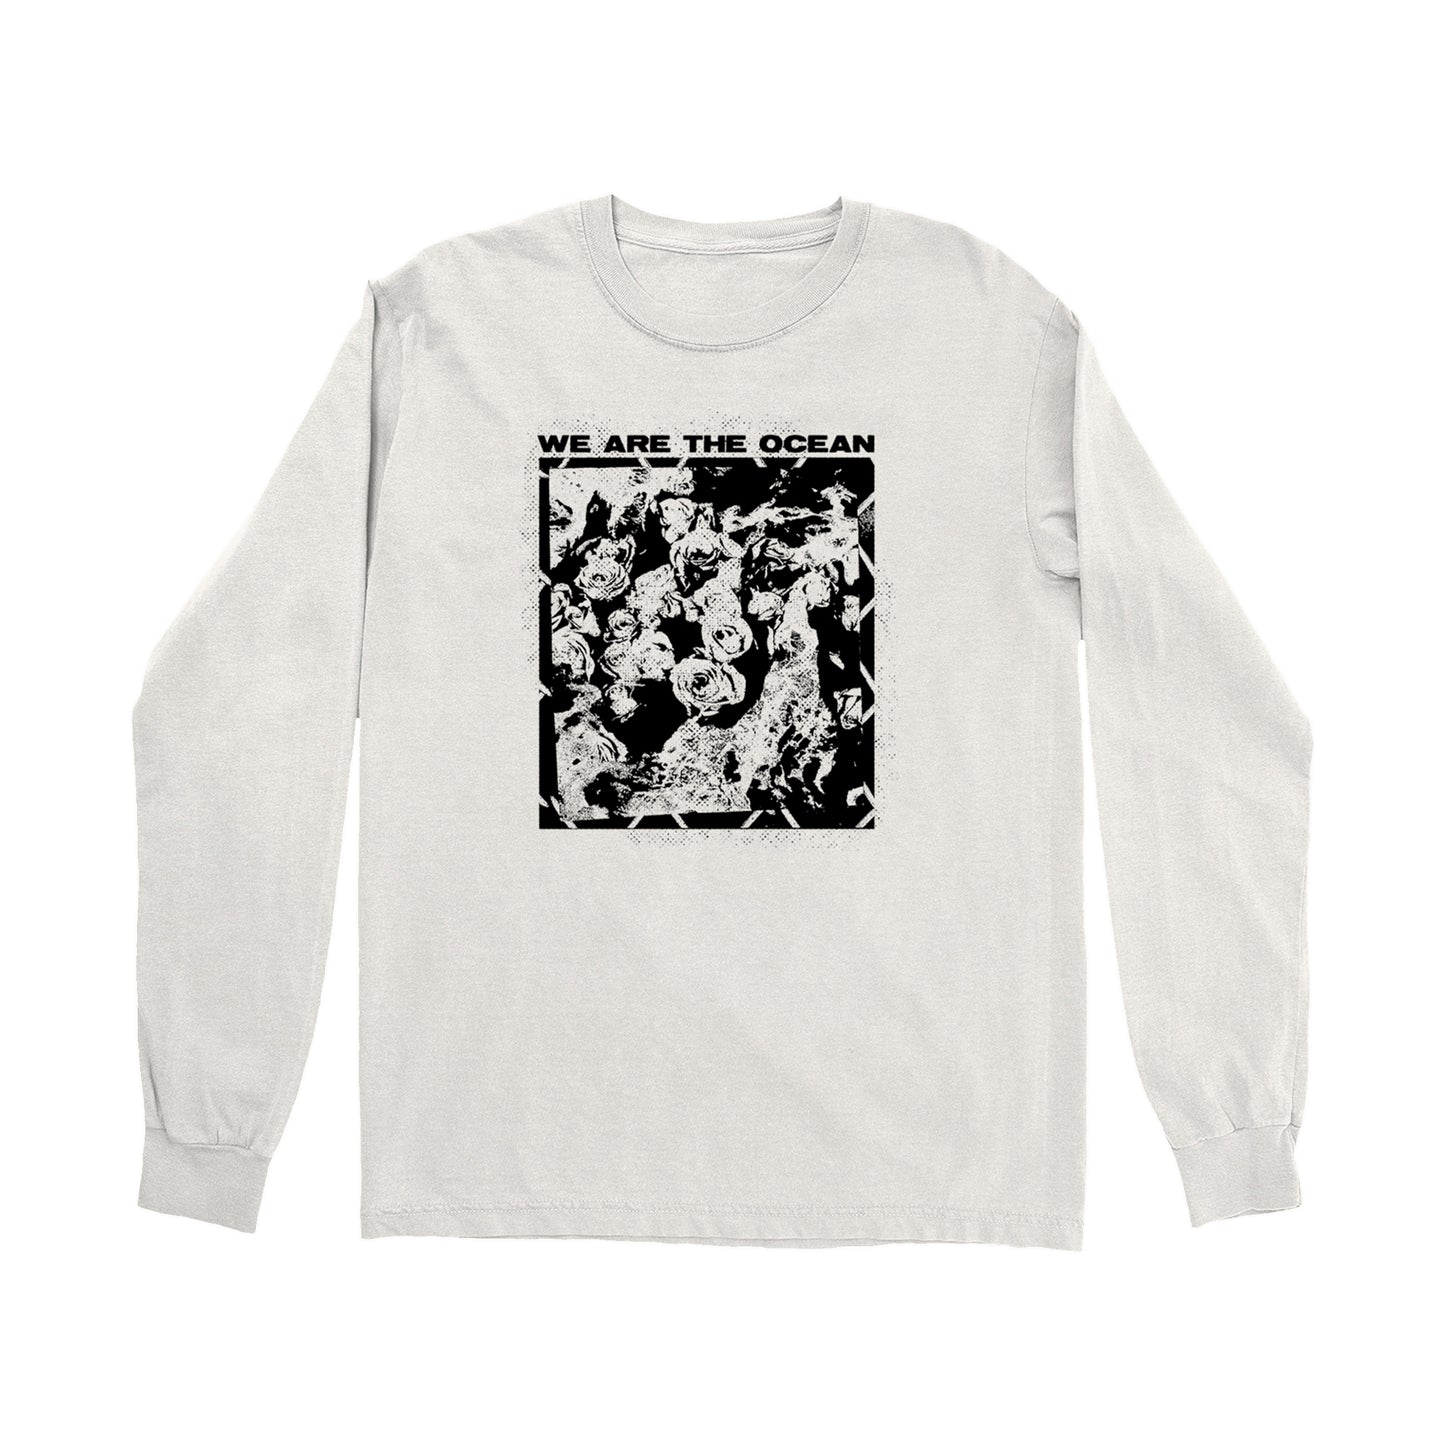 We Are The Ocean 'Maybe Today, Maybe Tomorrow' Long-sleeve shirt